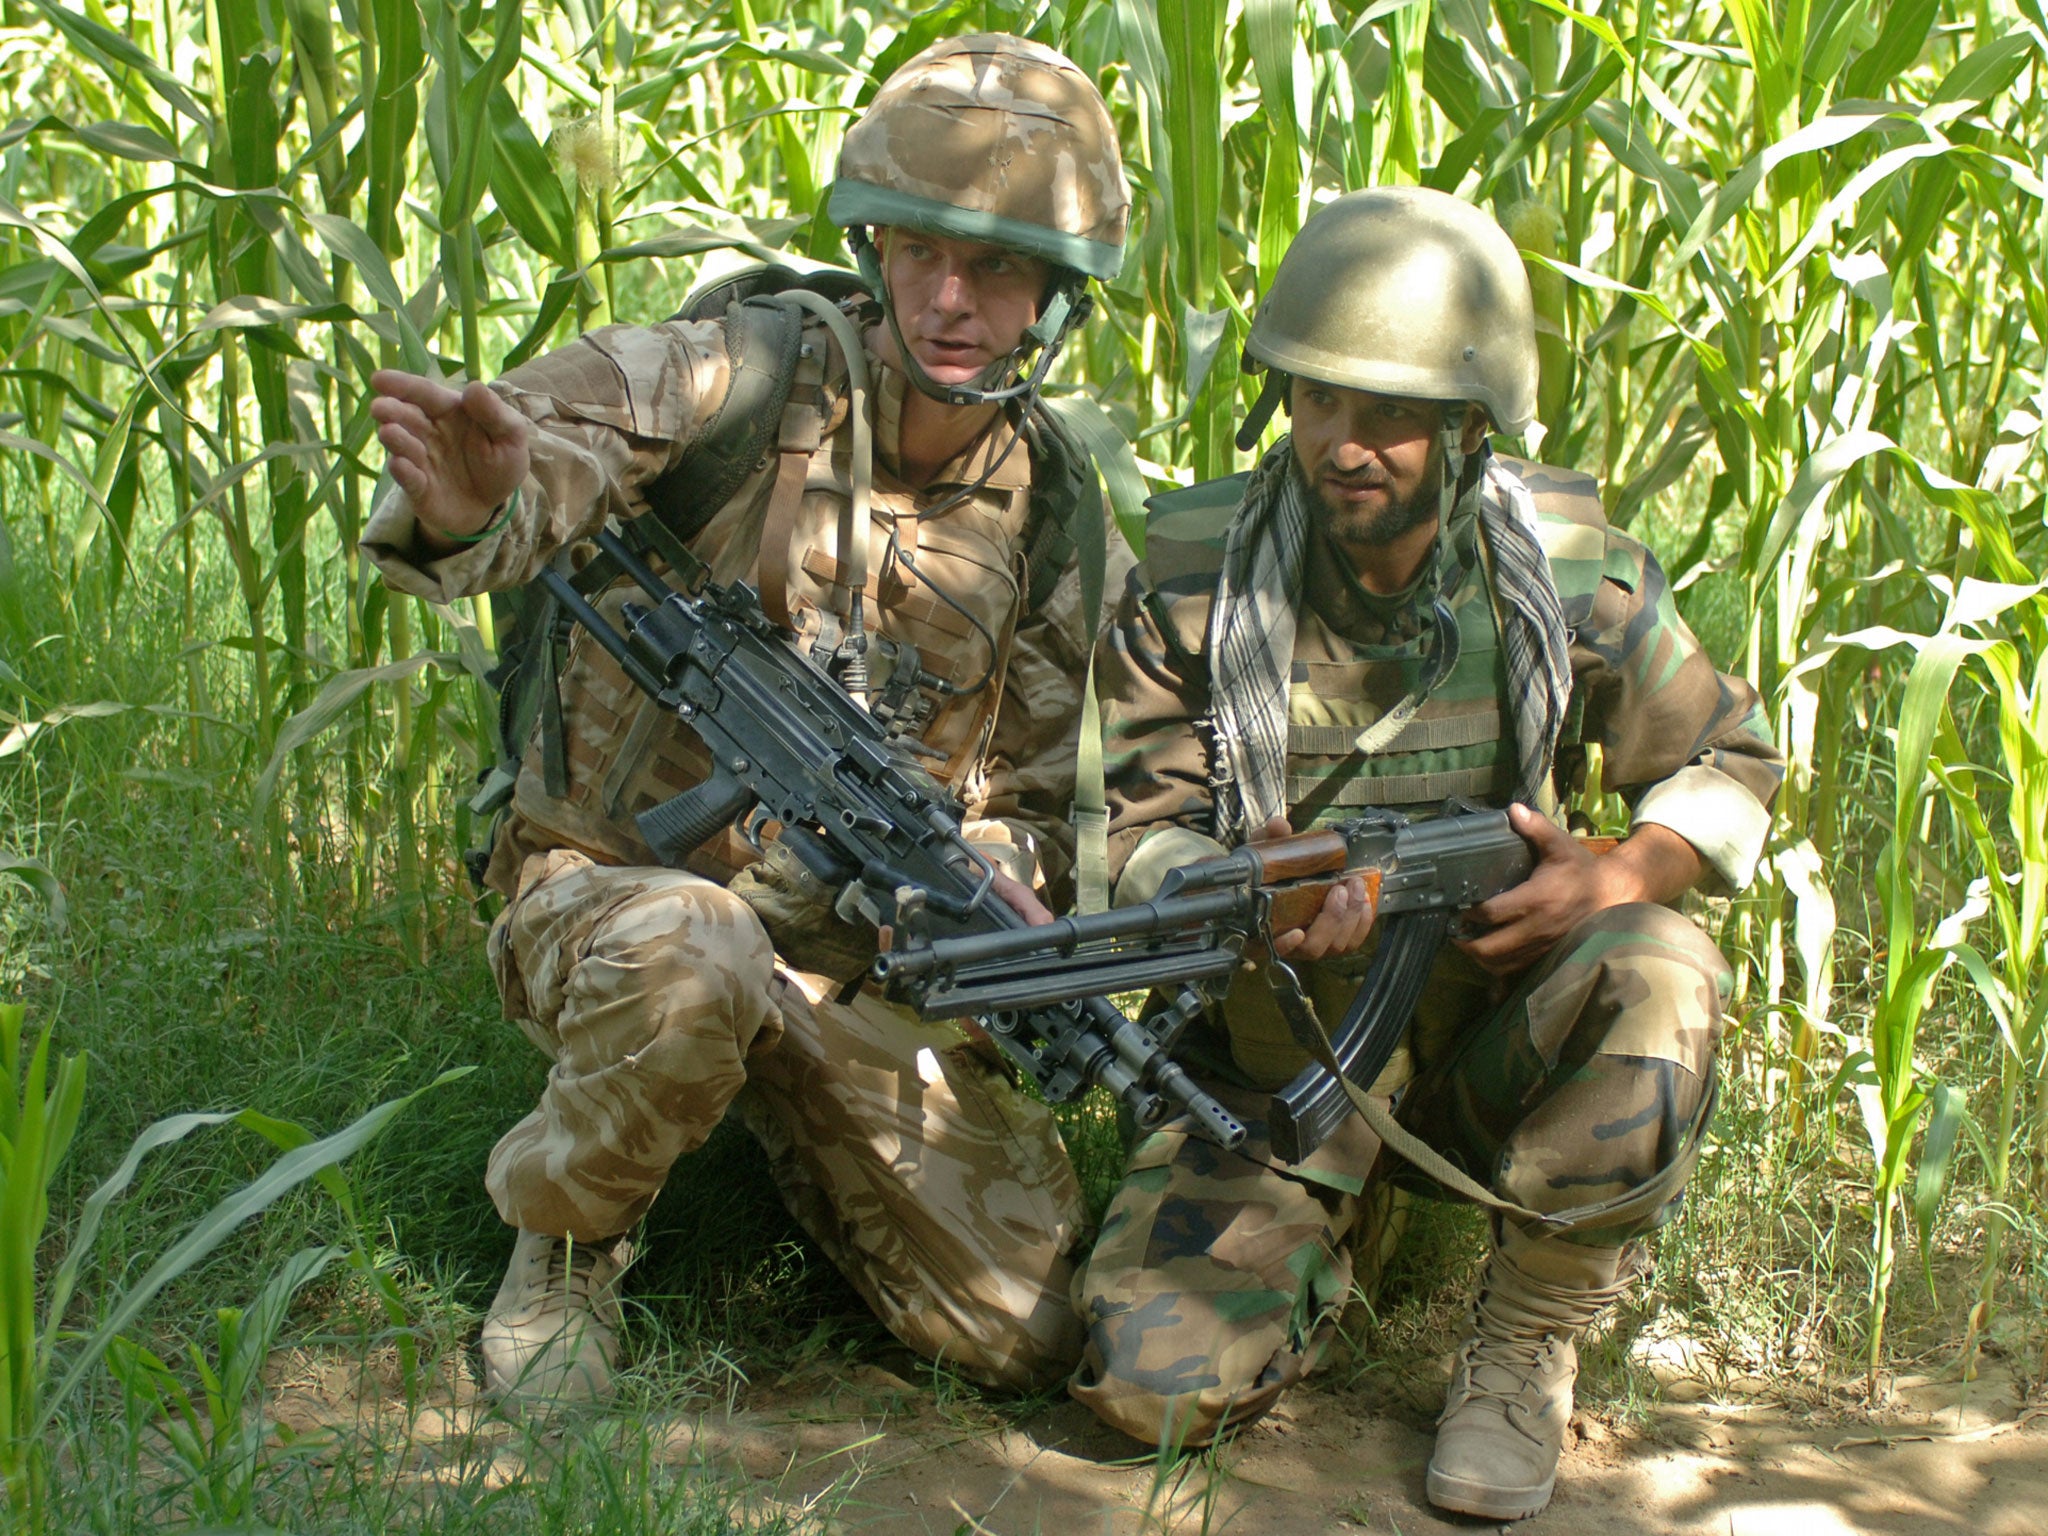 British territorial army forces in Afghanistan.